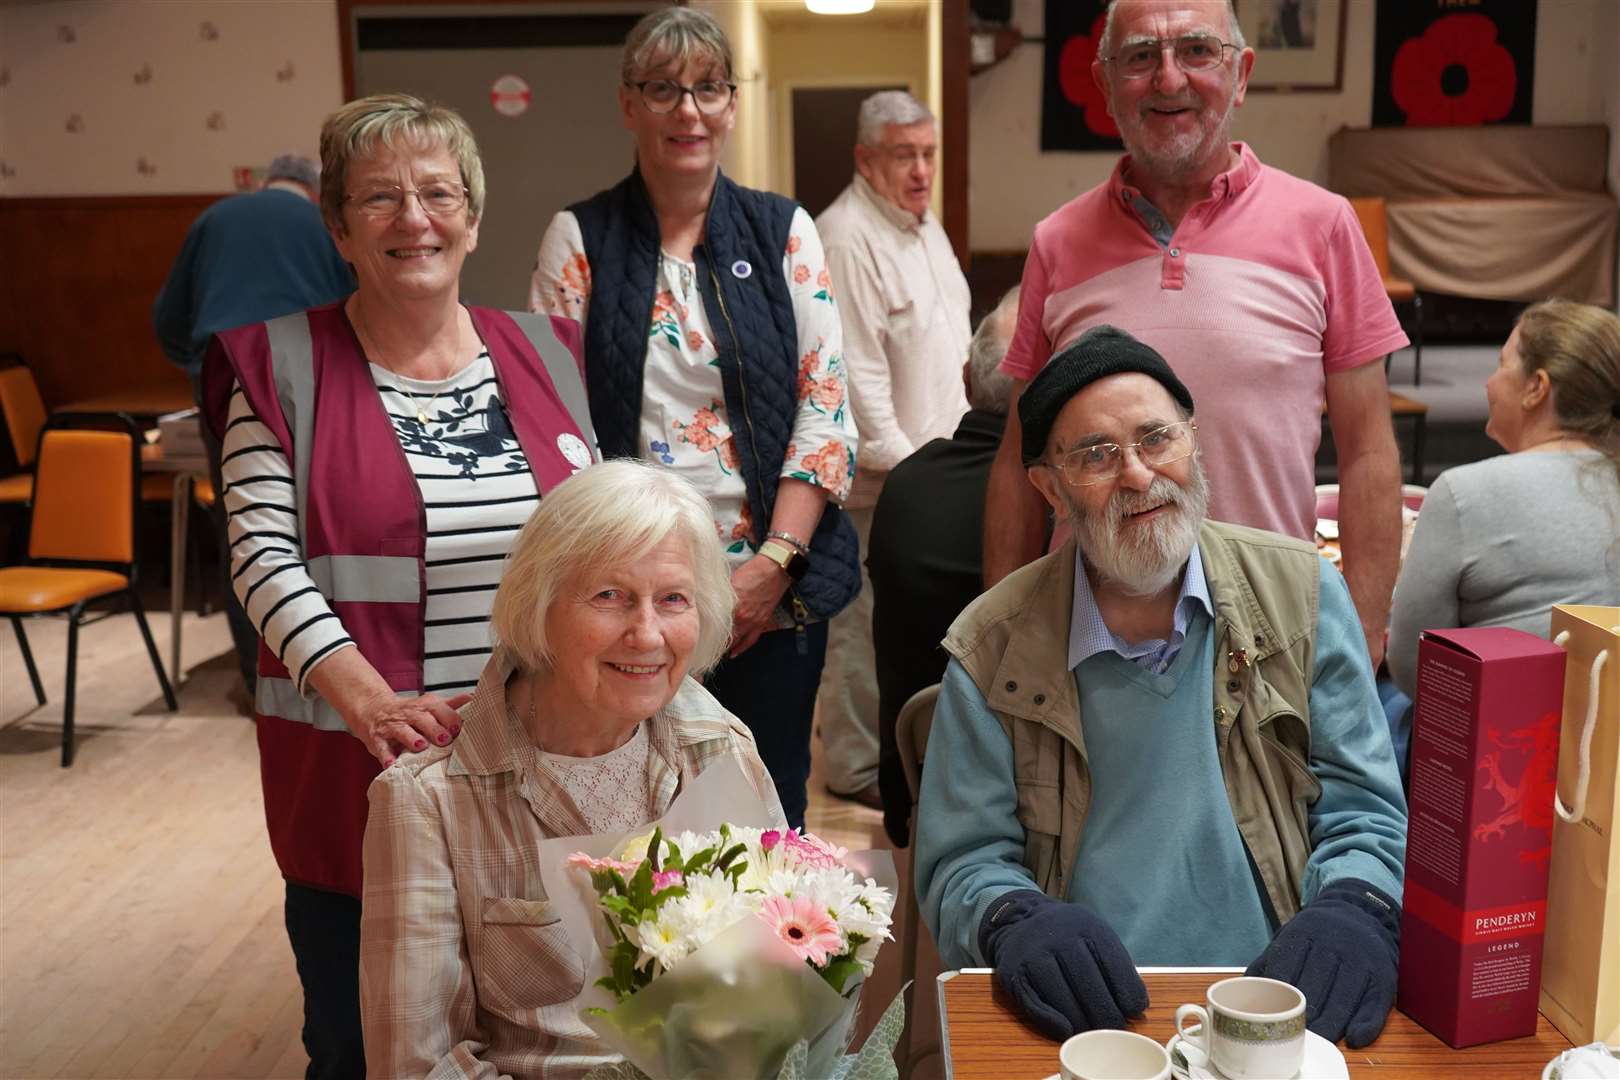 Turriff In Bloom committee members recognised the long service of John Smith and the support of his wife Elizabeth.